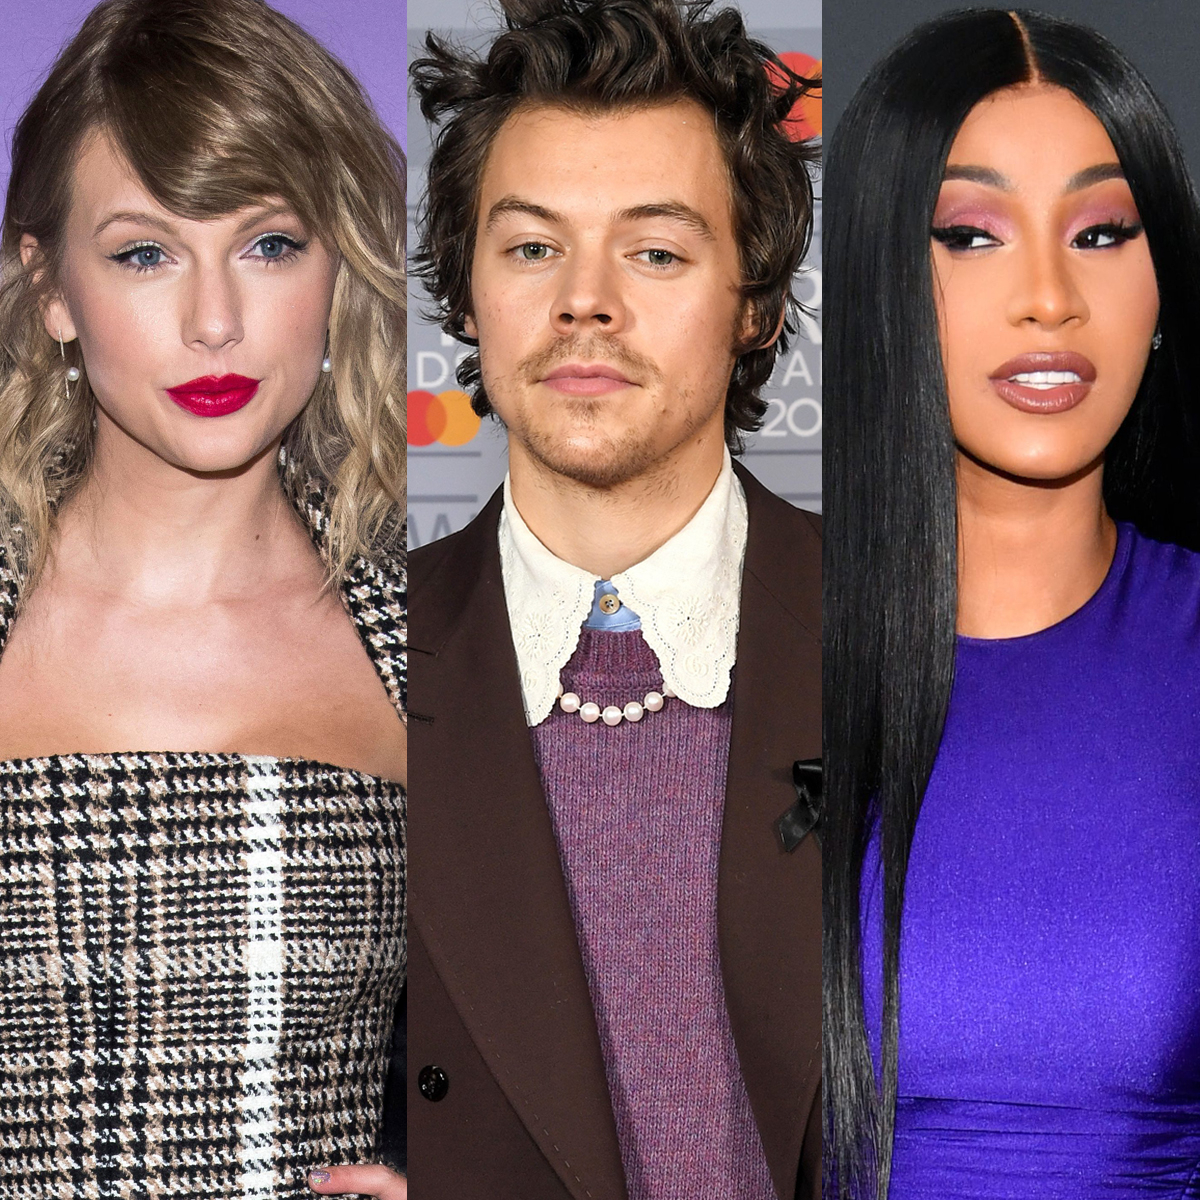 Grammys 2021 Lineup: BTS, Taylor Swift, Harry Styles, More